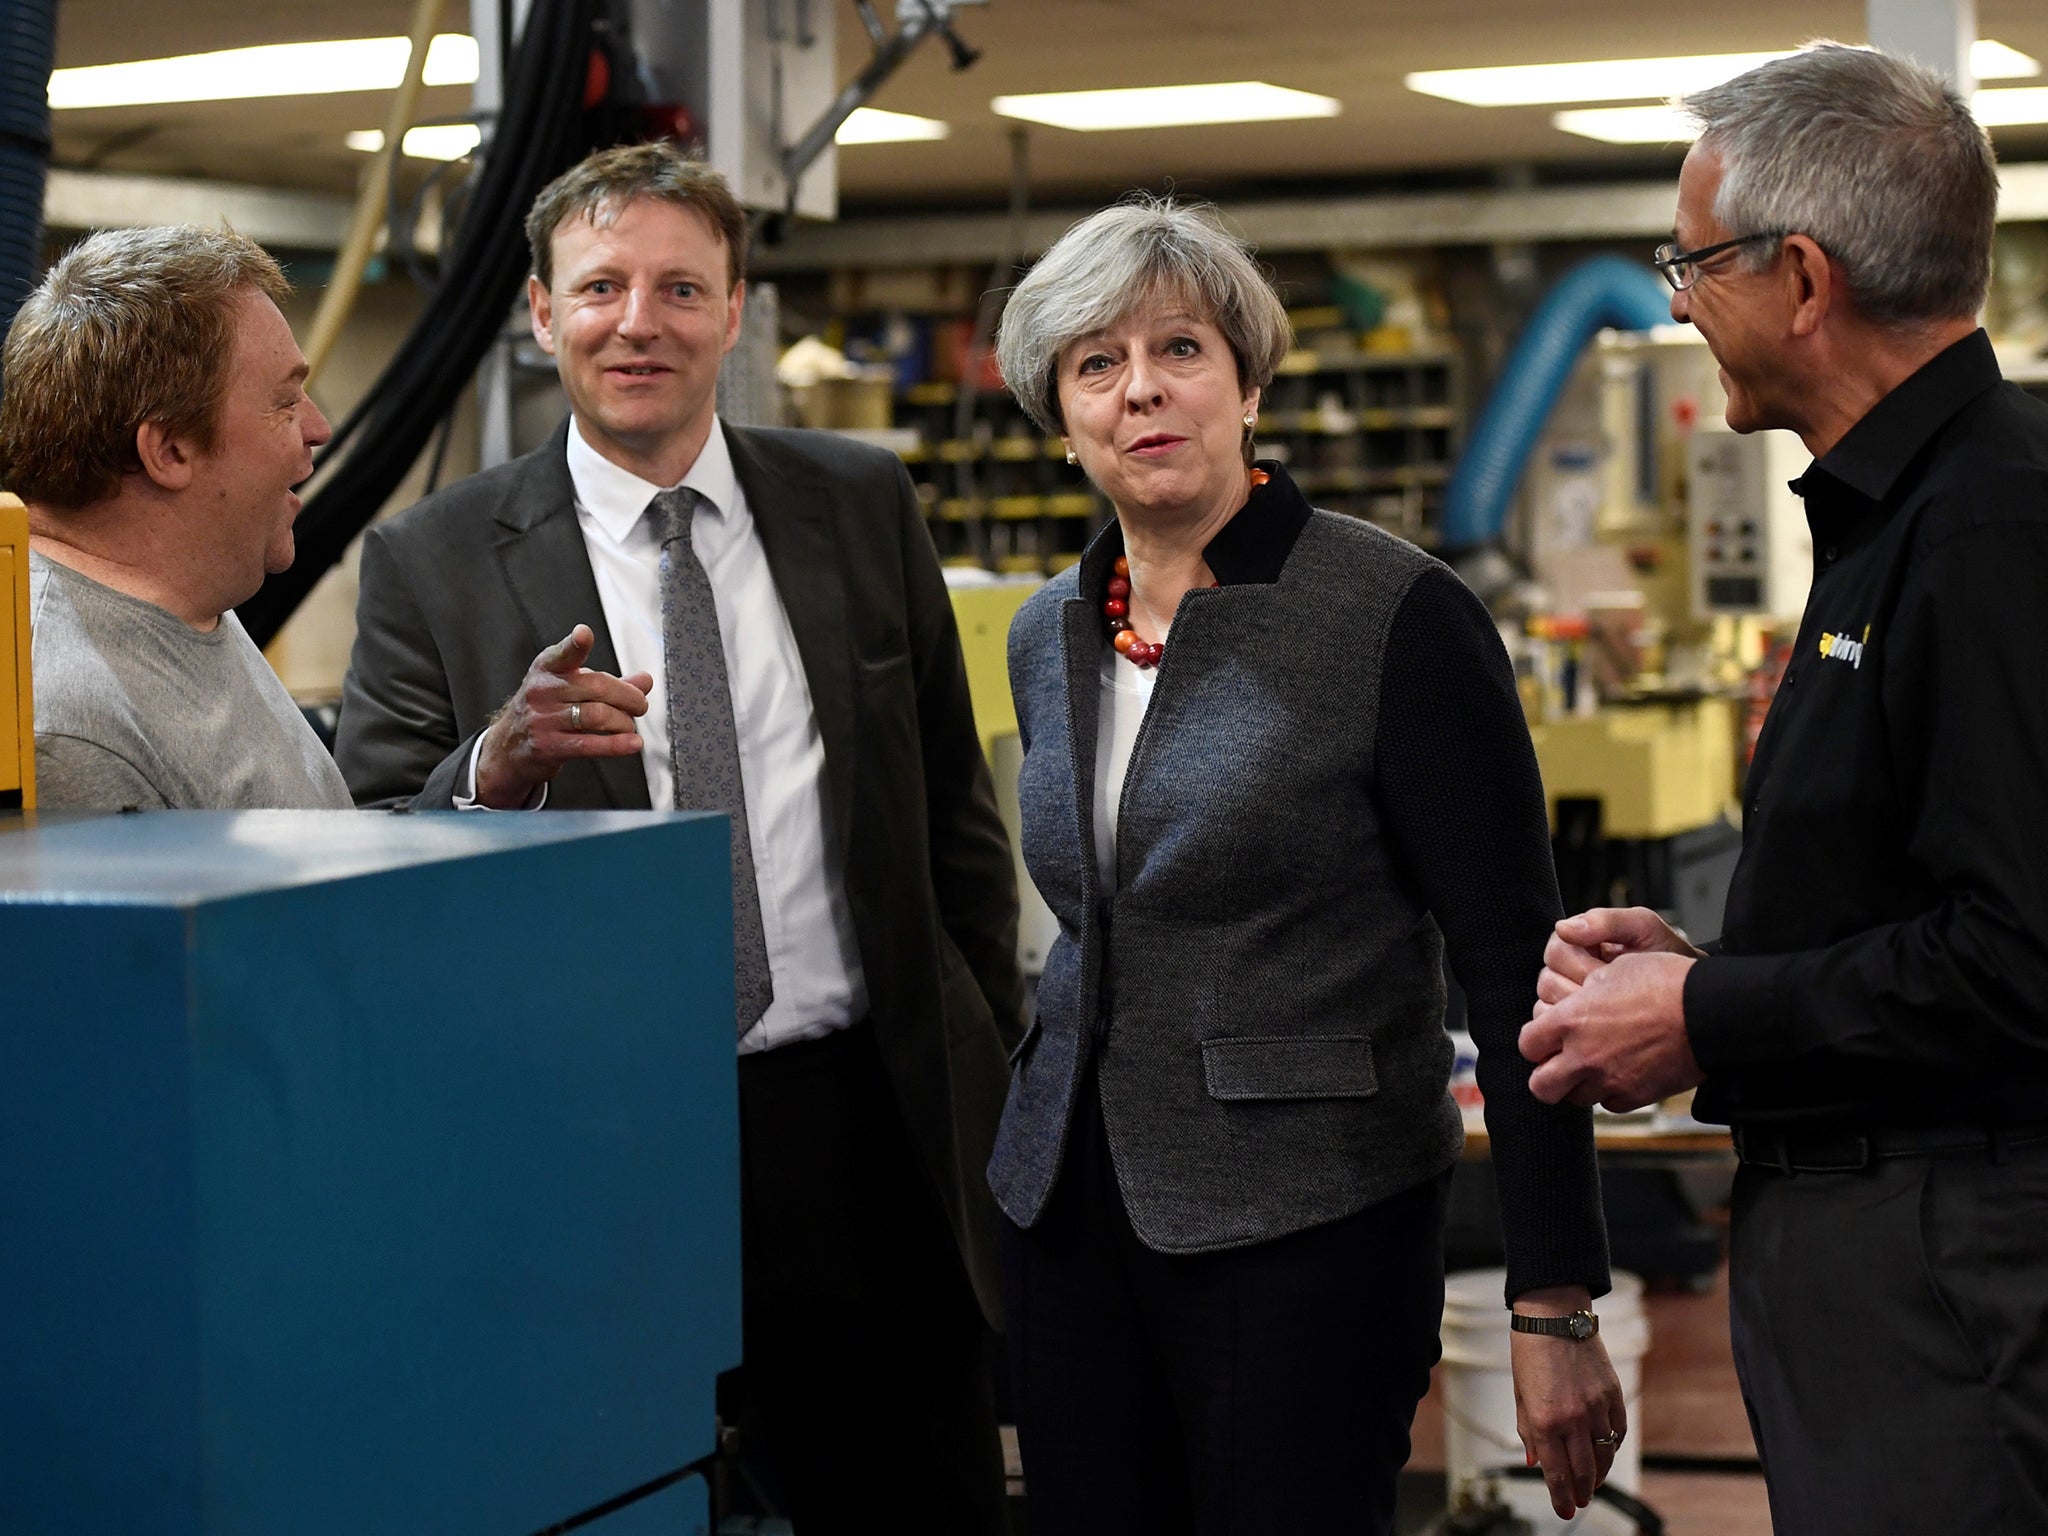 The Prime Minister meets employees during a visit to AP Diving in Cornwall